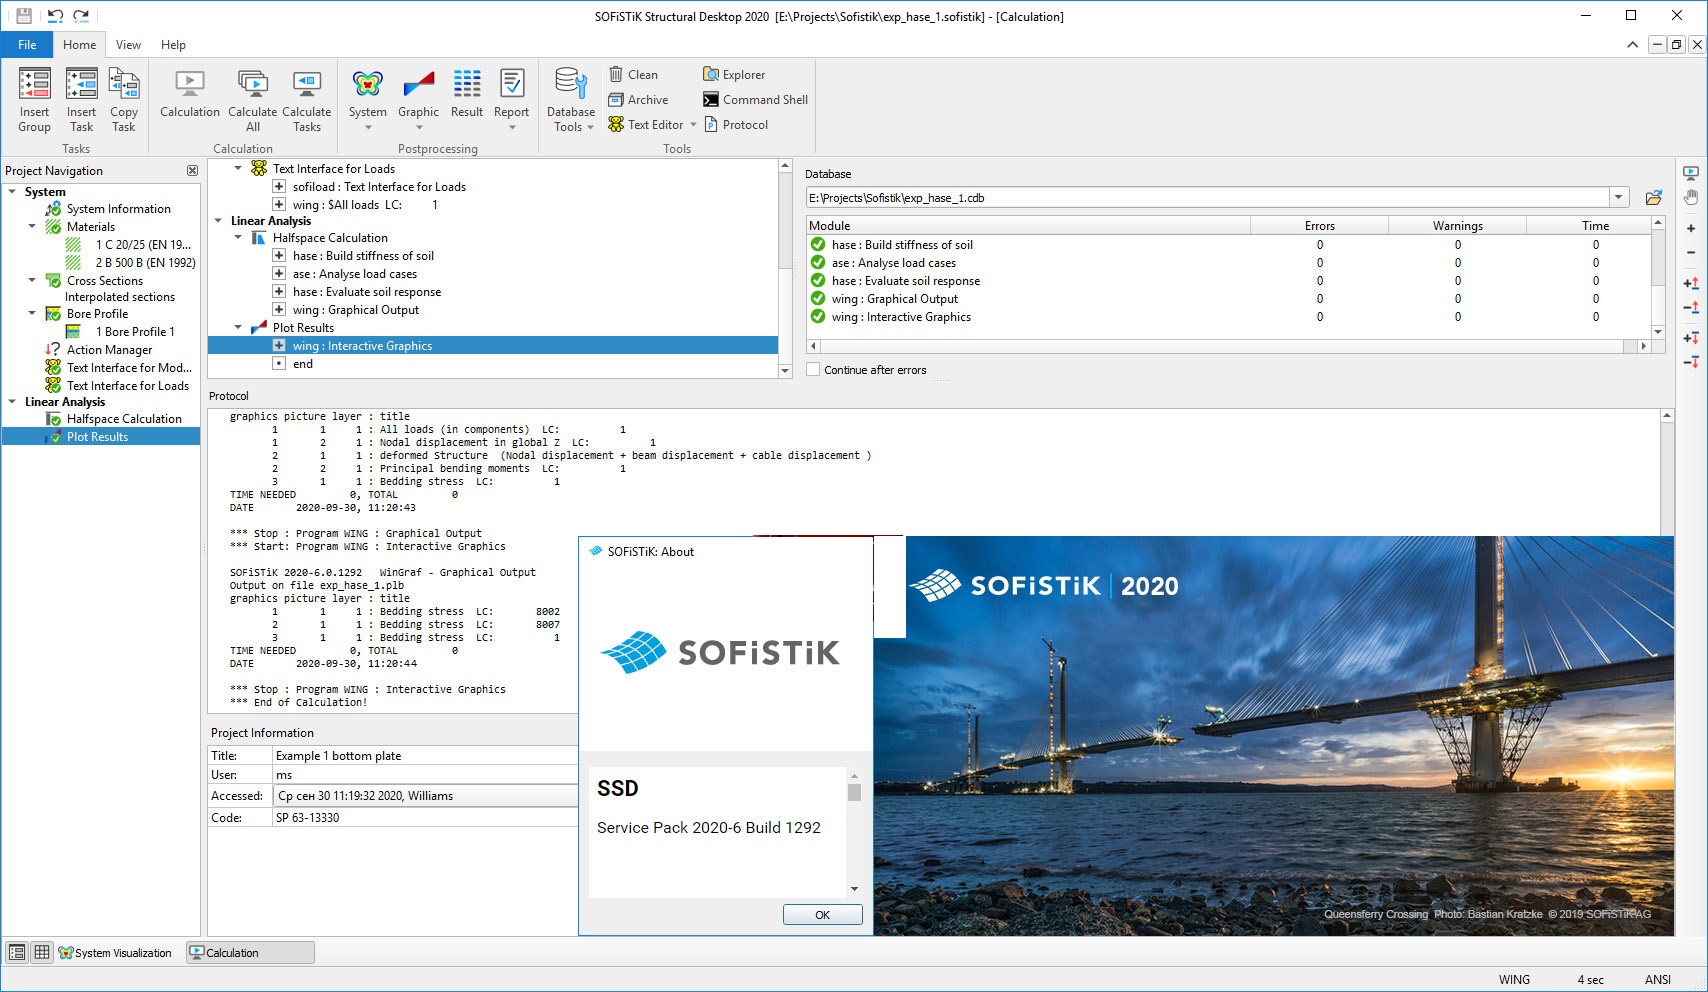 Working with SOFiSTiK 2020 SP 2020.6 full license